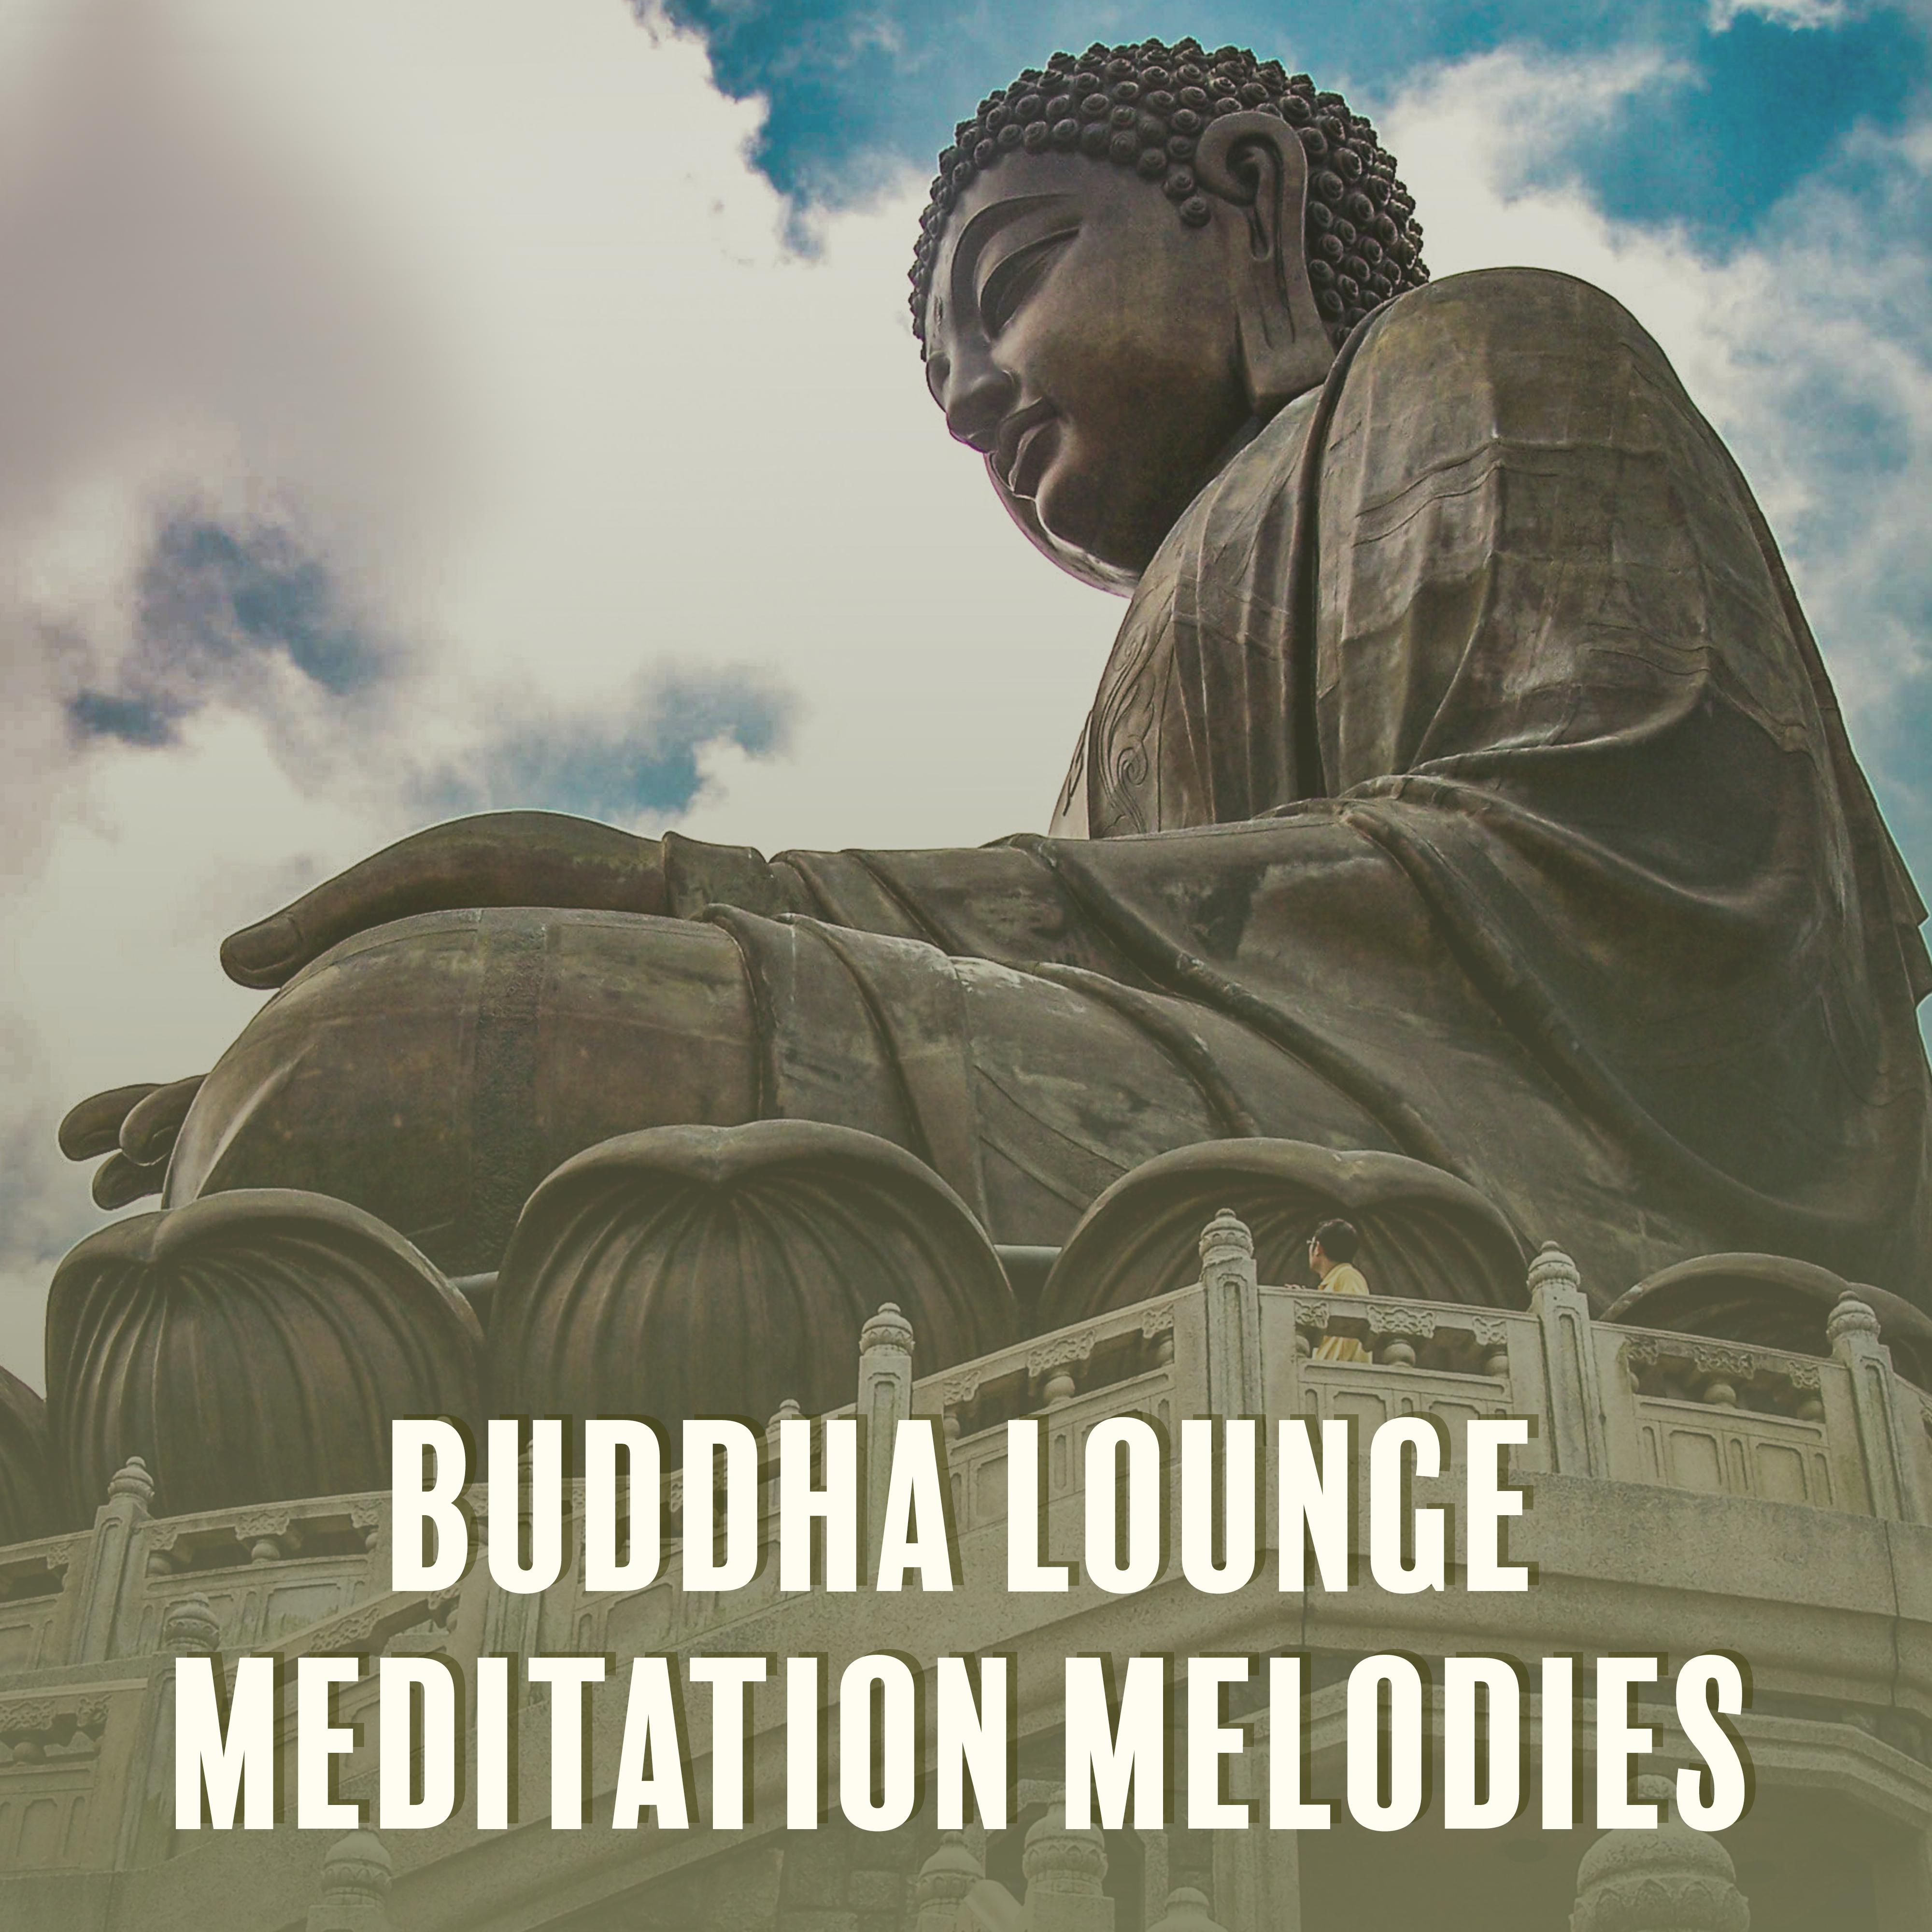 Buddha Lounge Meditation Melodies: 15 New Age Ambient Tracks for Pure Yoga & Deep Relaxation Experience, Chakra Healing, Inner Energy Increase, New Music 2019